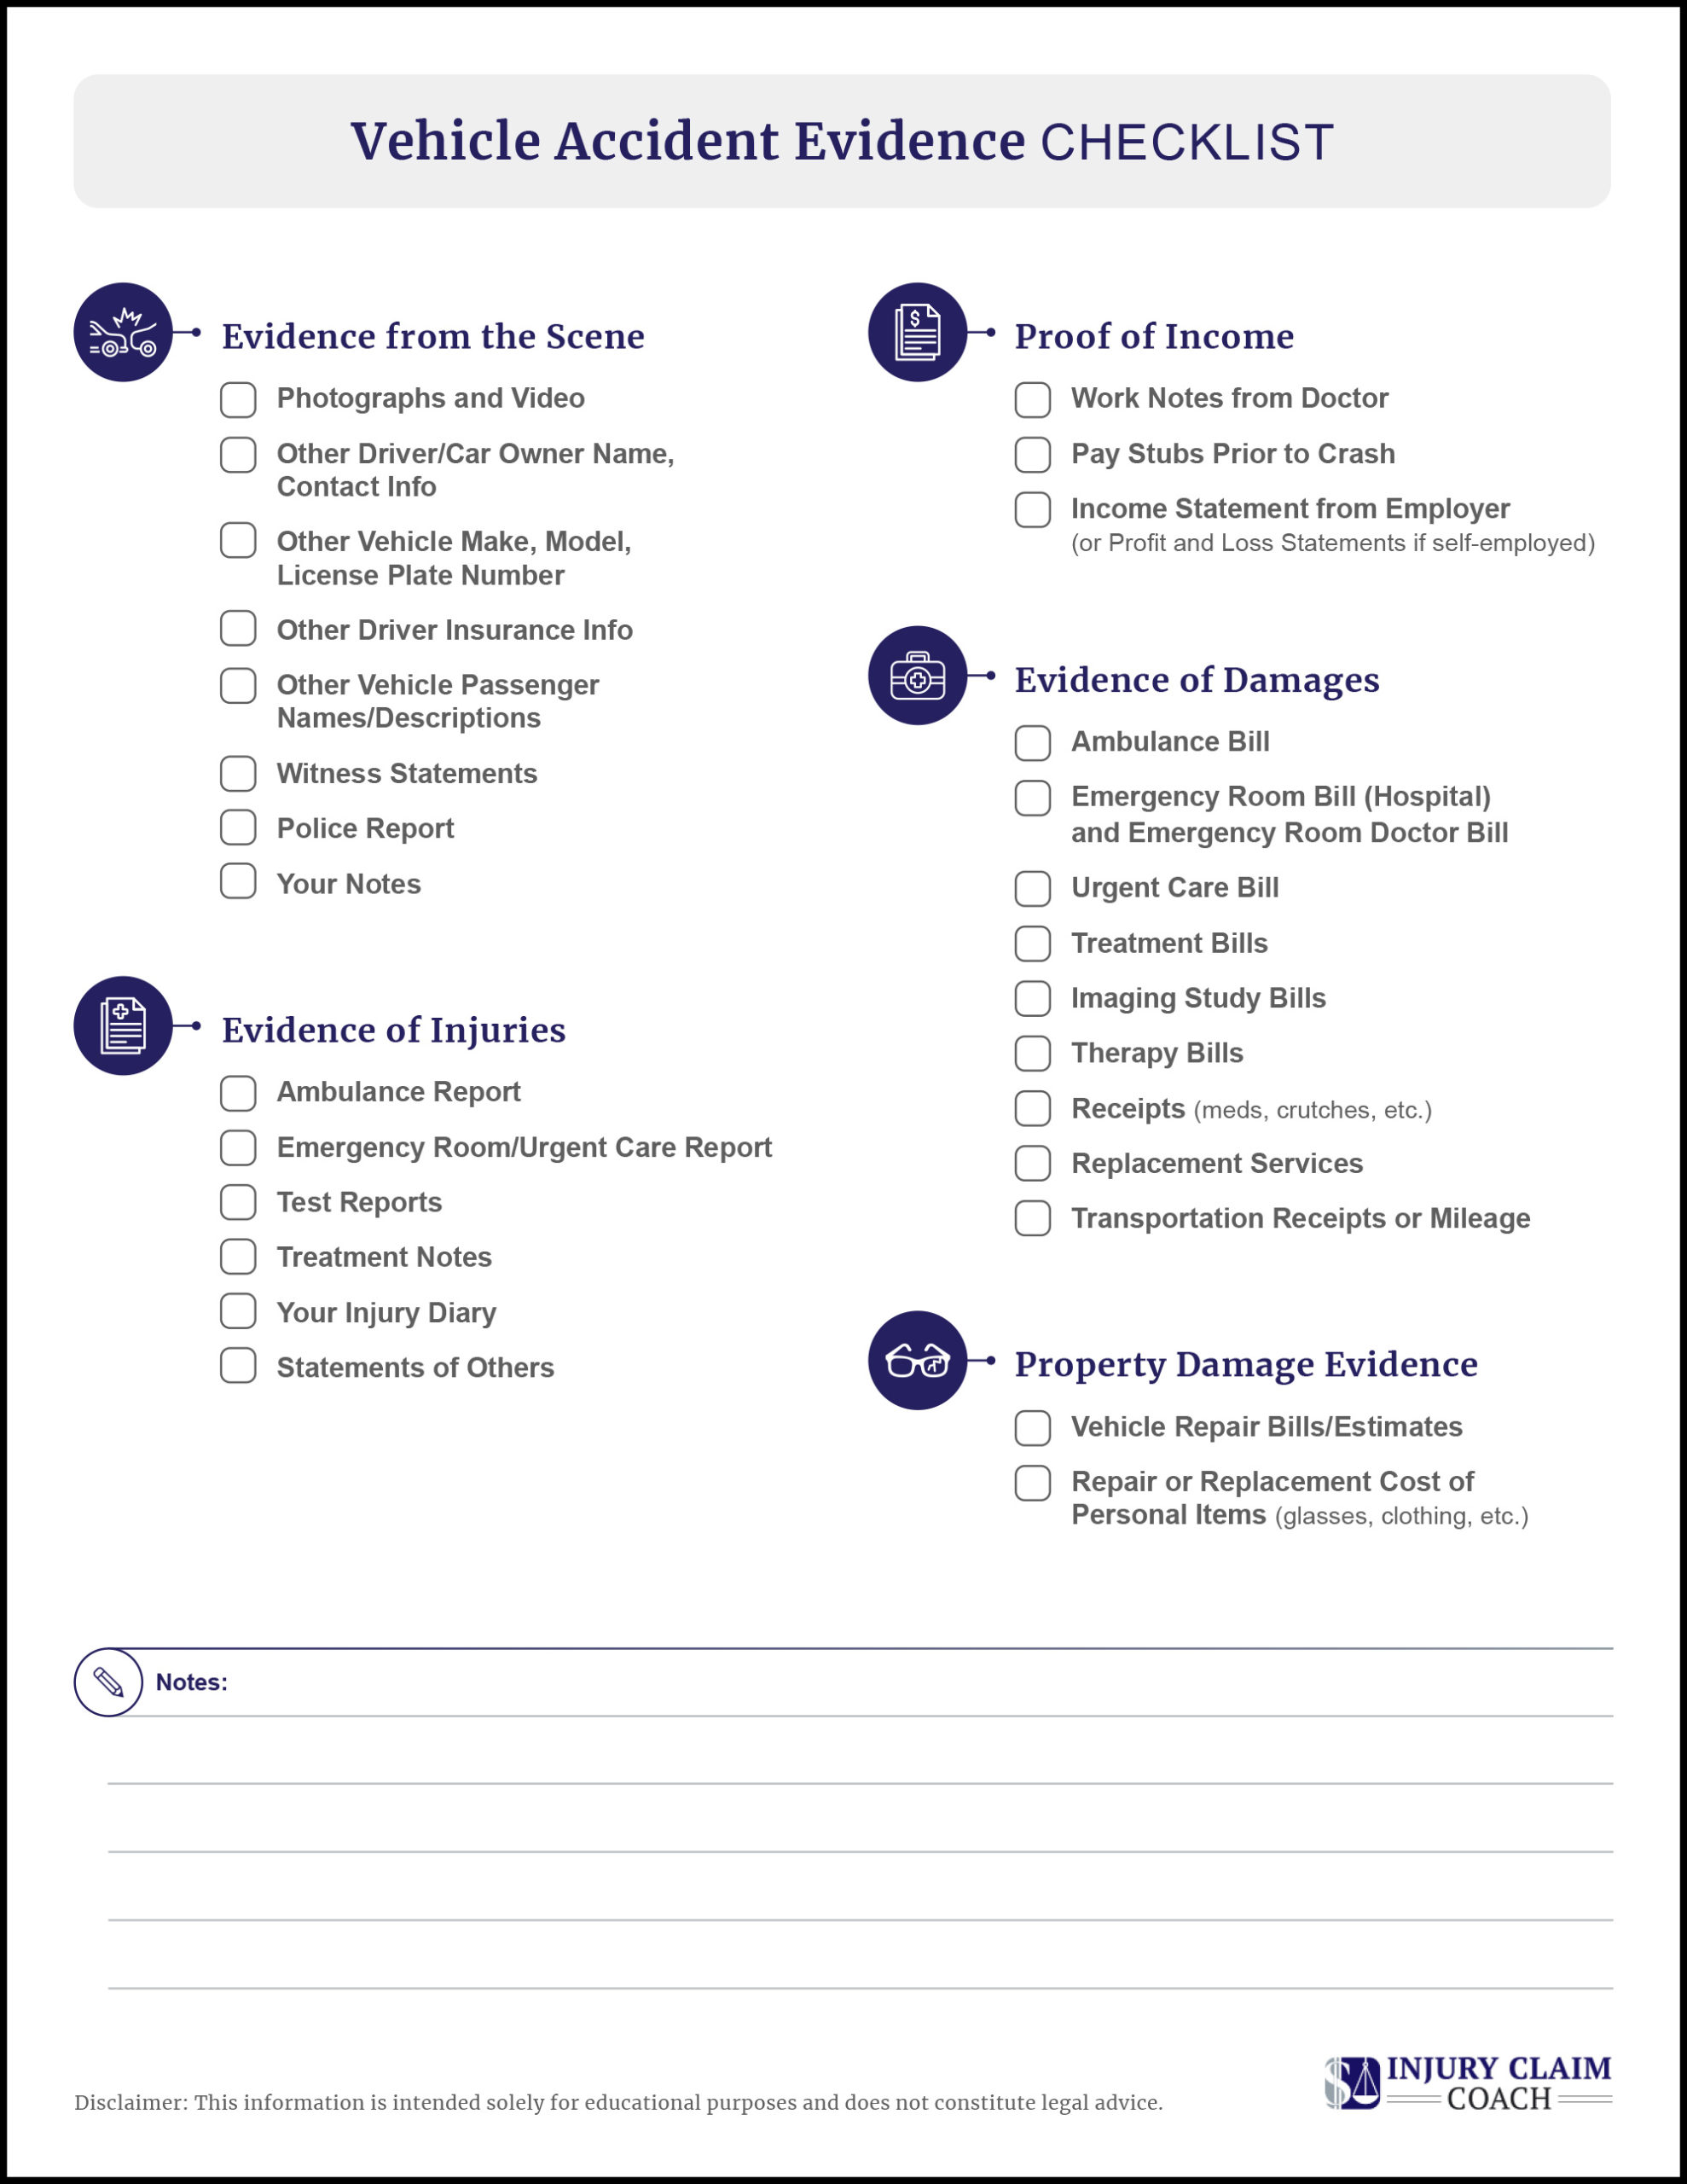 Vehicle Accident Evidence Checklist